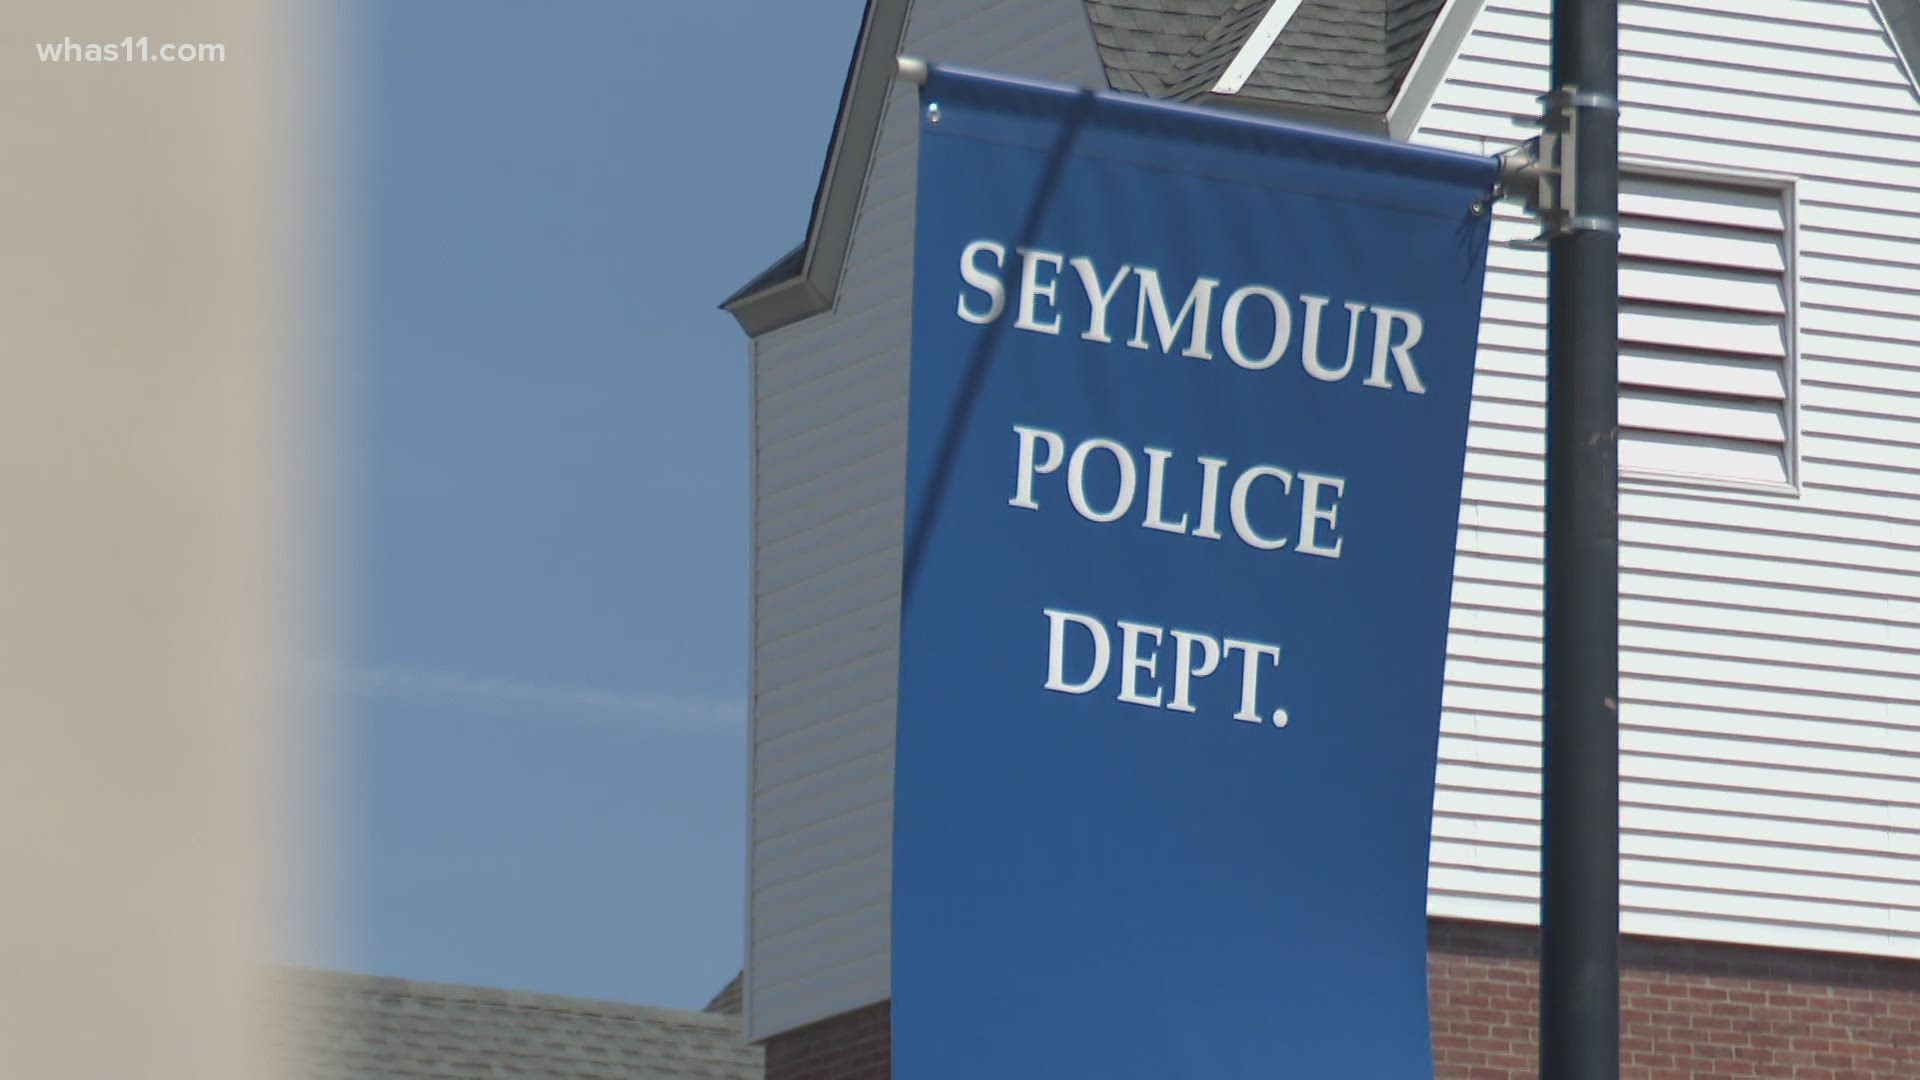 "We have had just about as many DUI's on the weekend, in the first two weeks than we usually have for an entire month, Seymour Police said.